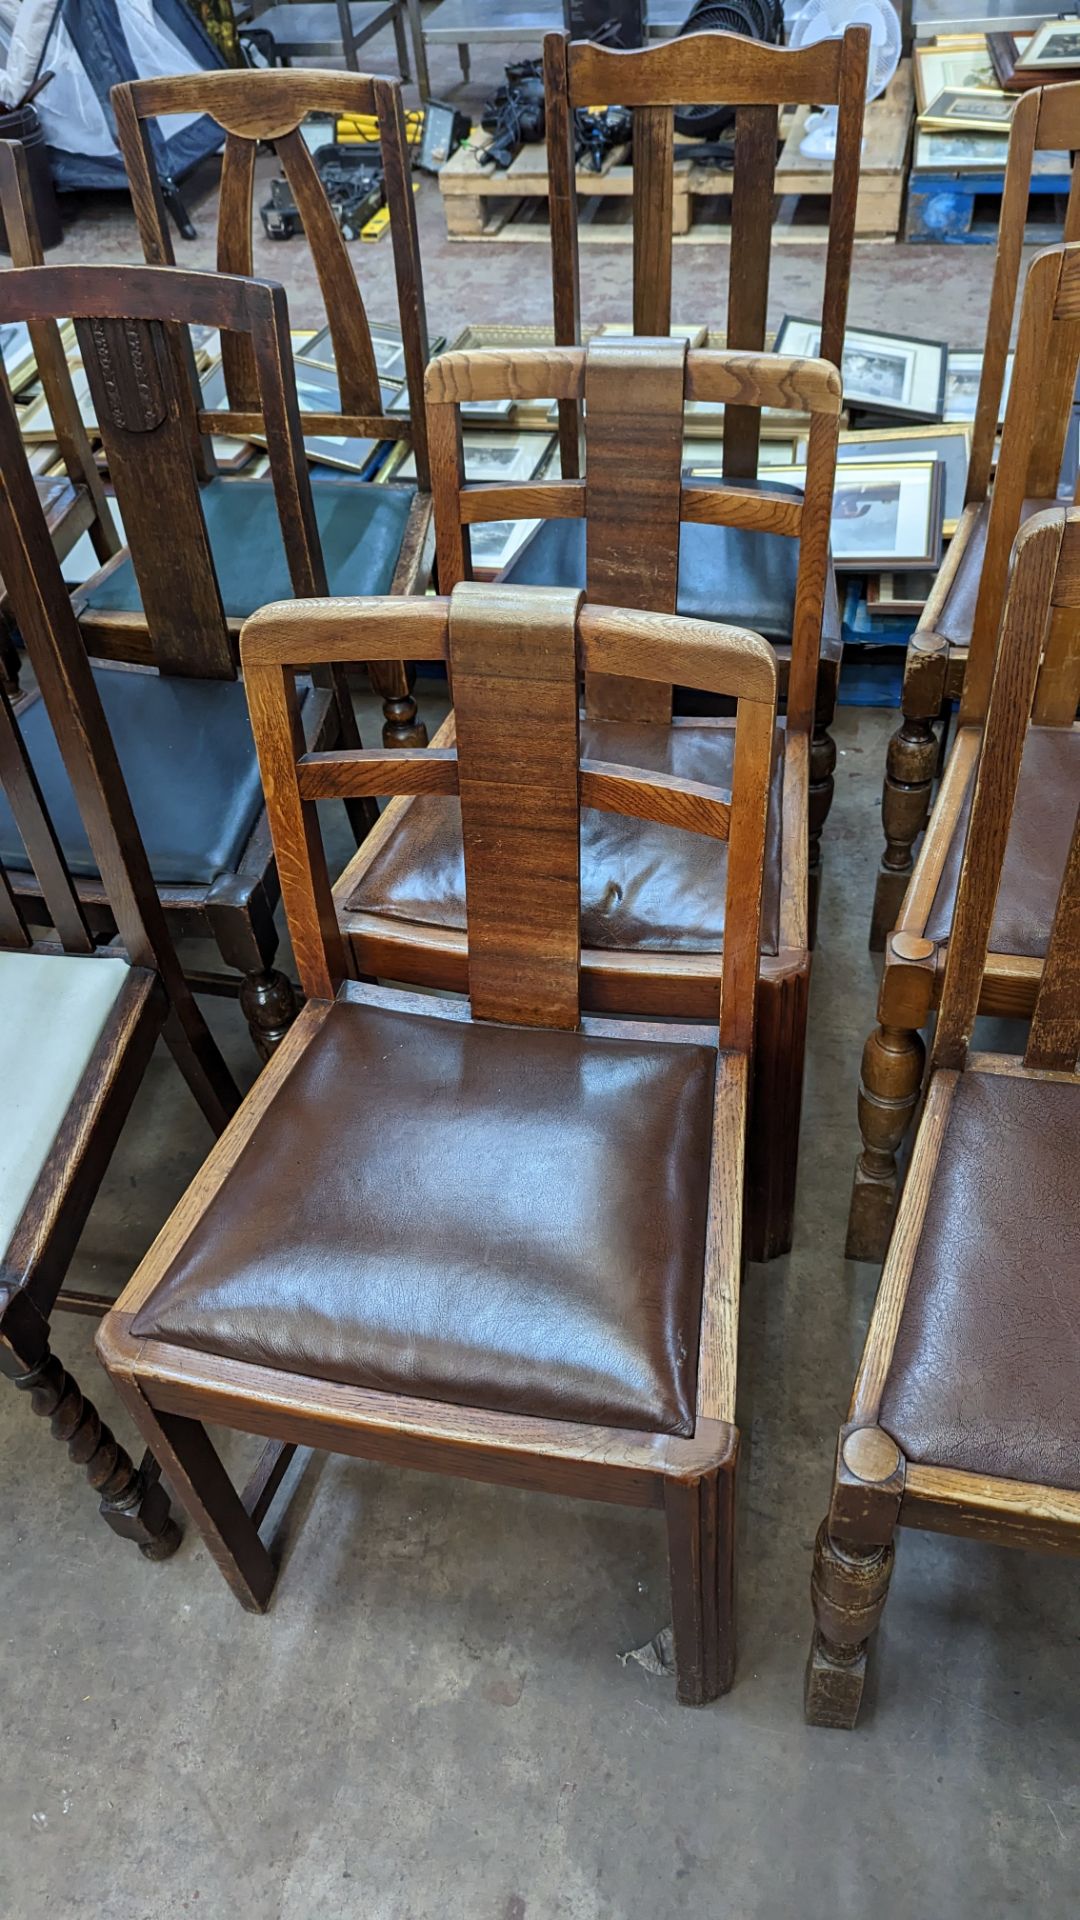 9 off assorted wooden dining chairs - Image 5 of 6